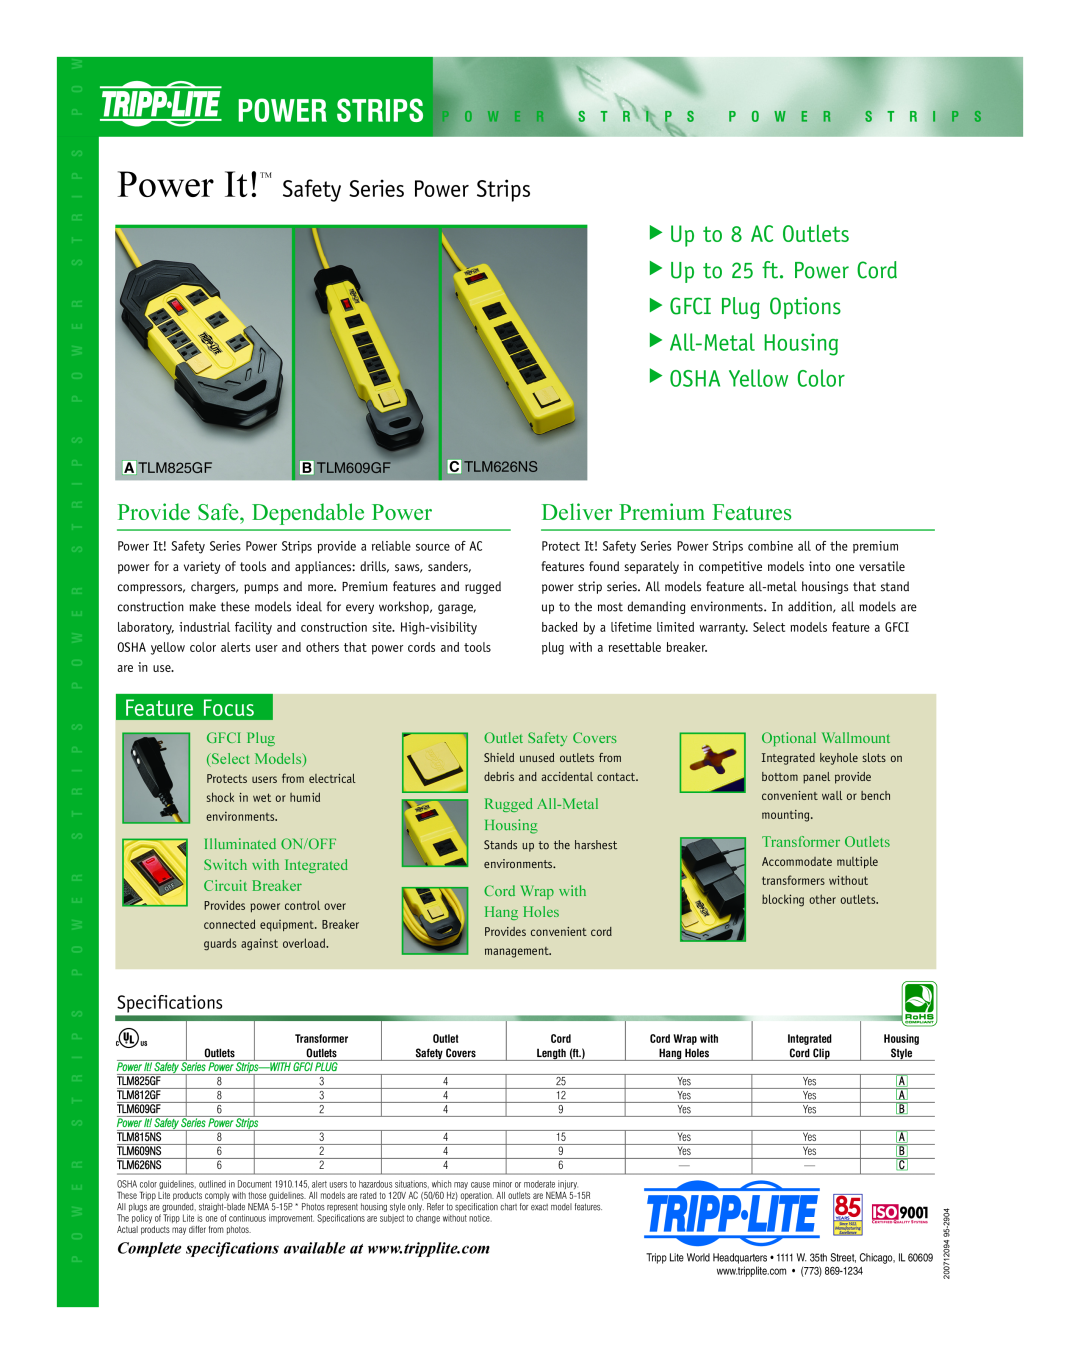 Tripp Lite TLM626SAA Power It!TM Safety Series Power Strips, Up to 8 AC Outlets, Provide Safe, Dependable Power 